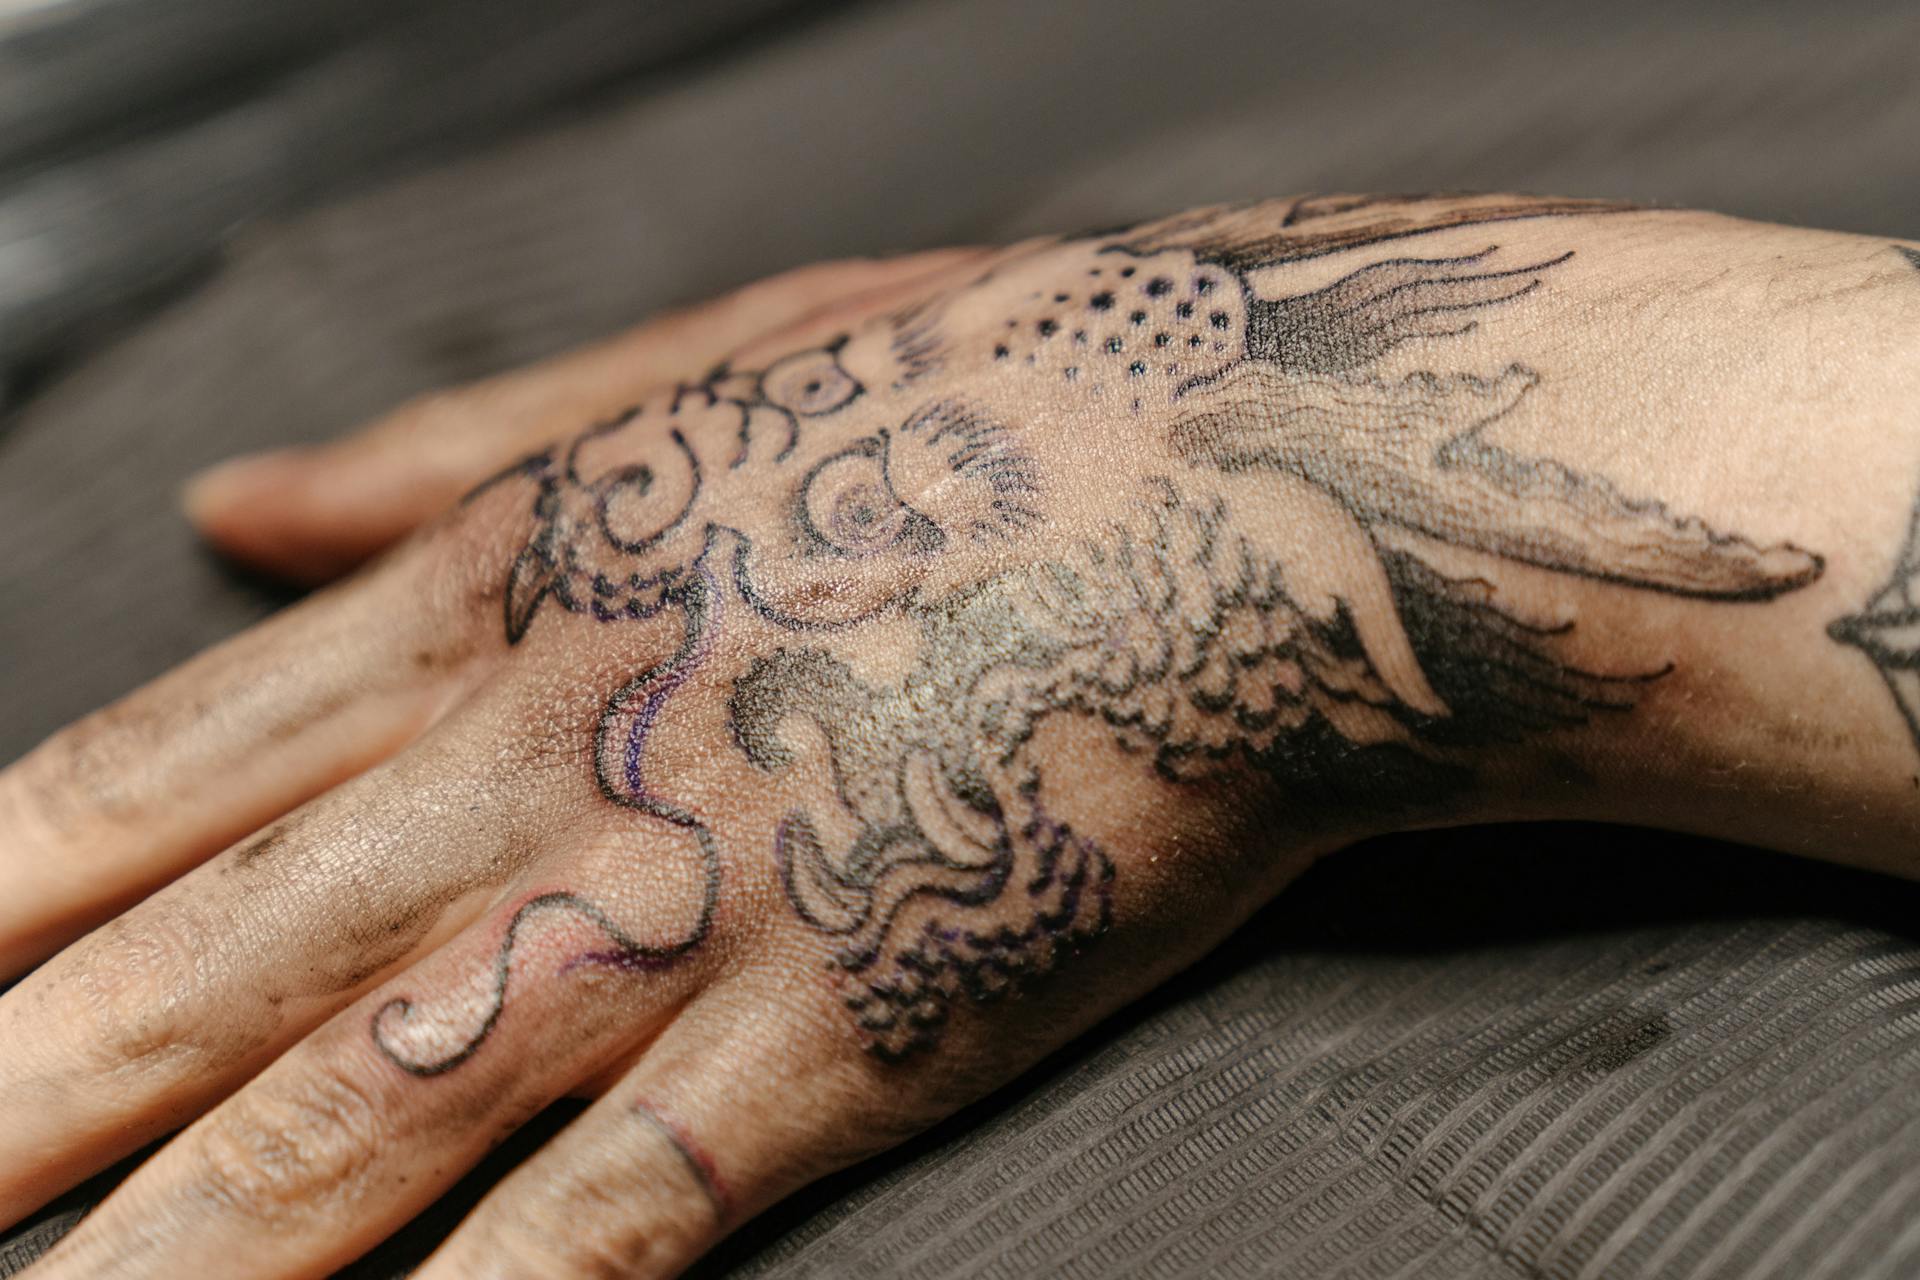 A person with a dragon tattoo | Source: Pexels